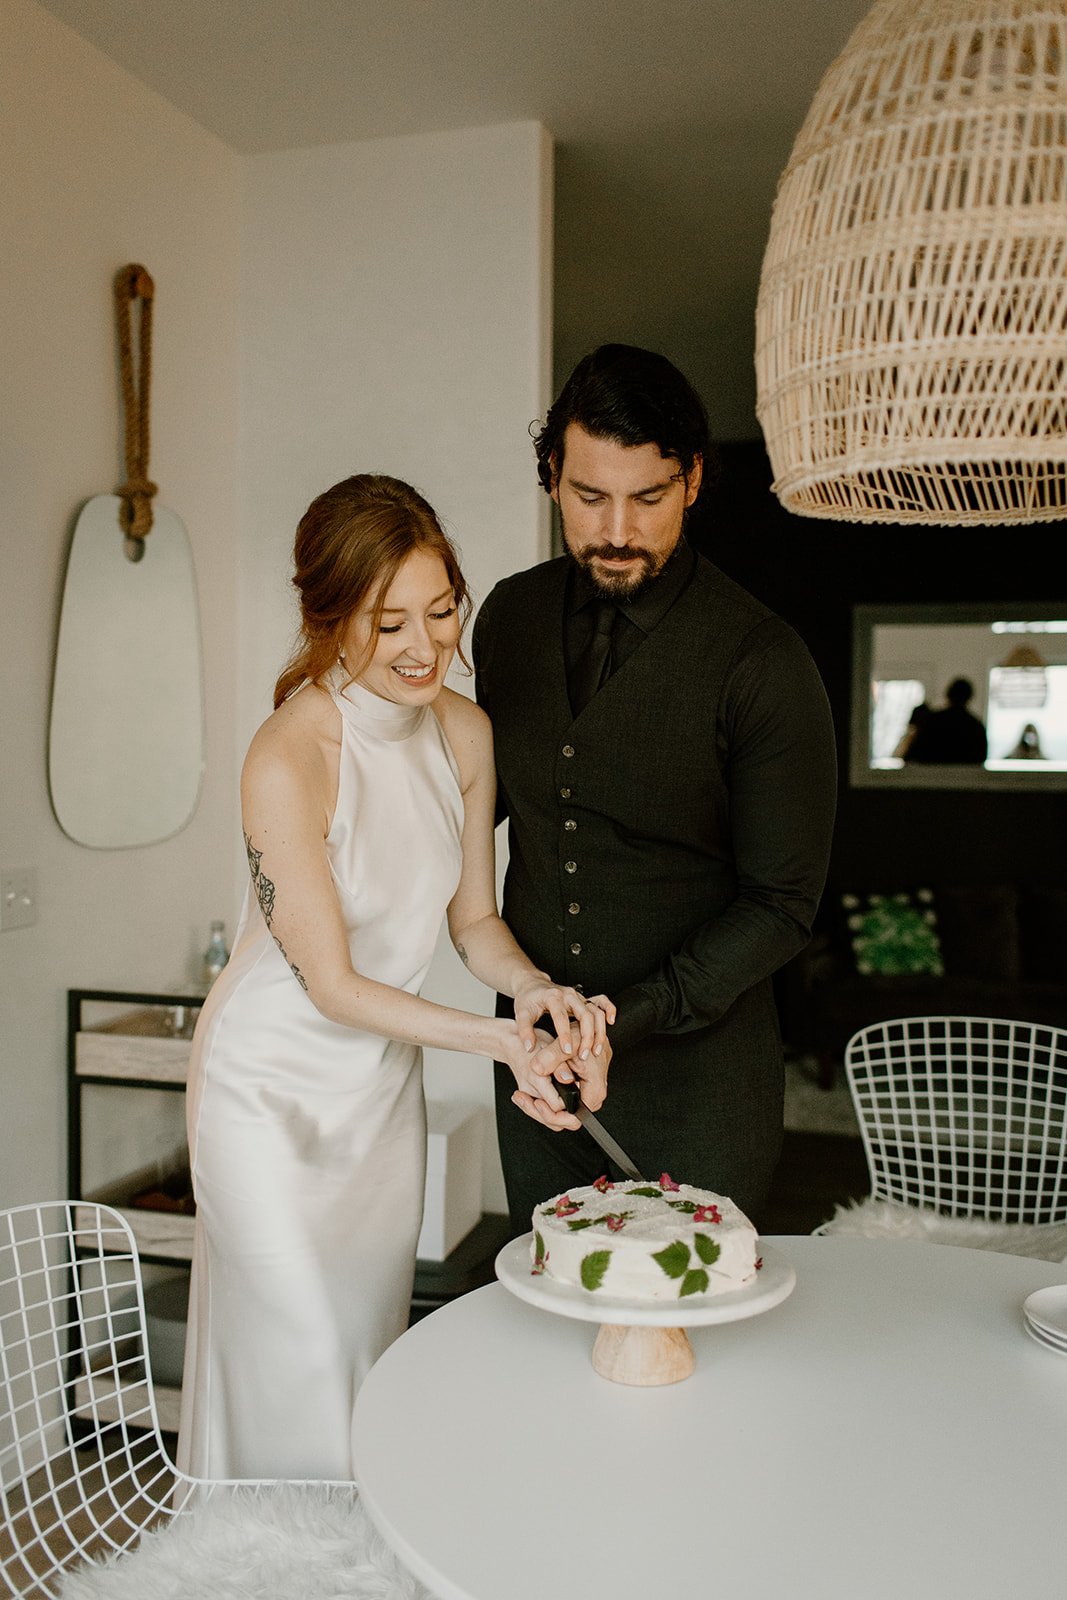 Bride and Groom in their wedding attire cutting their wedding cake inside the kitchen of their Airbnb